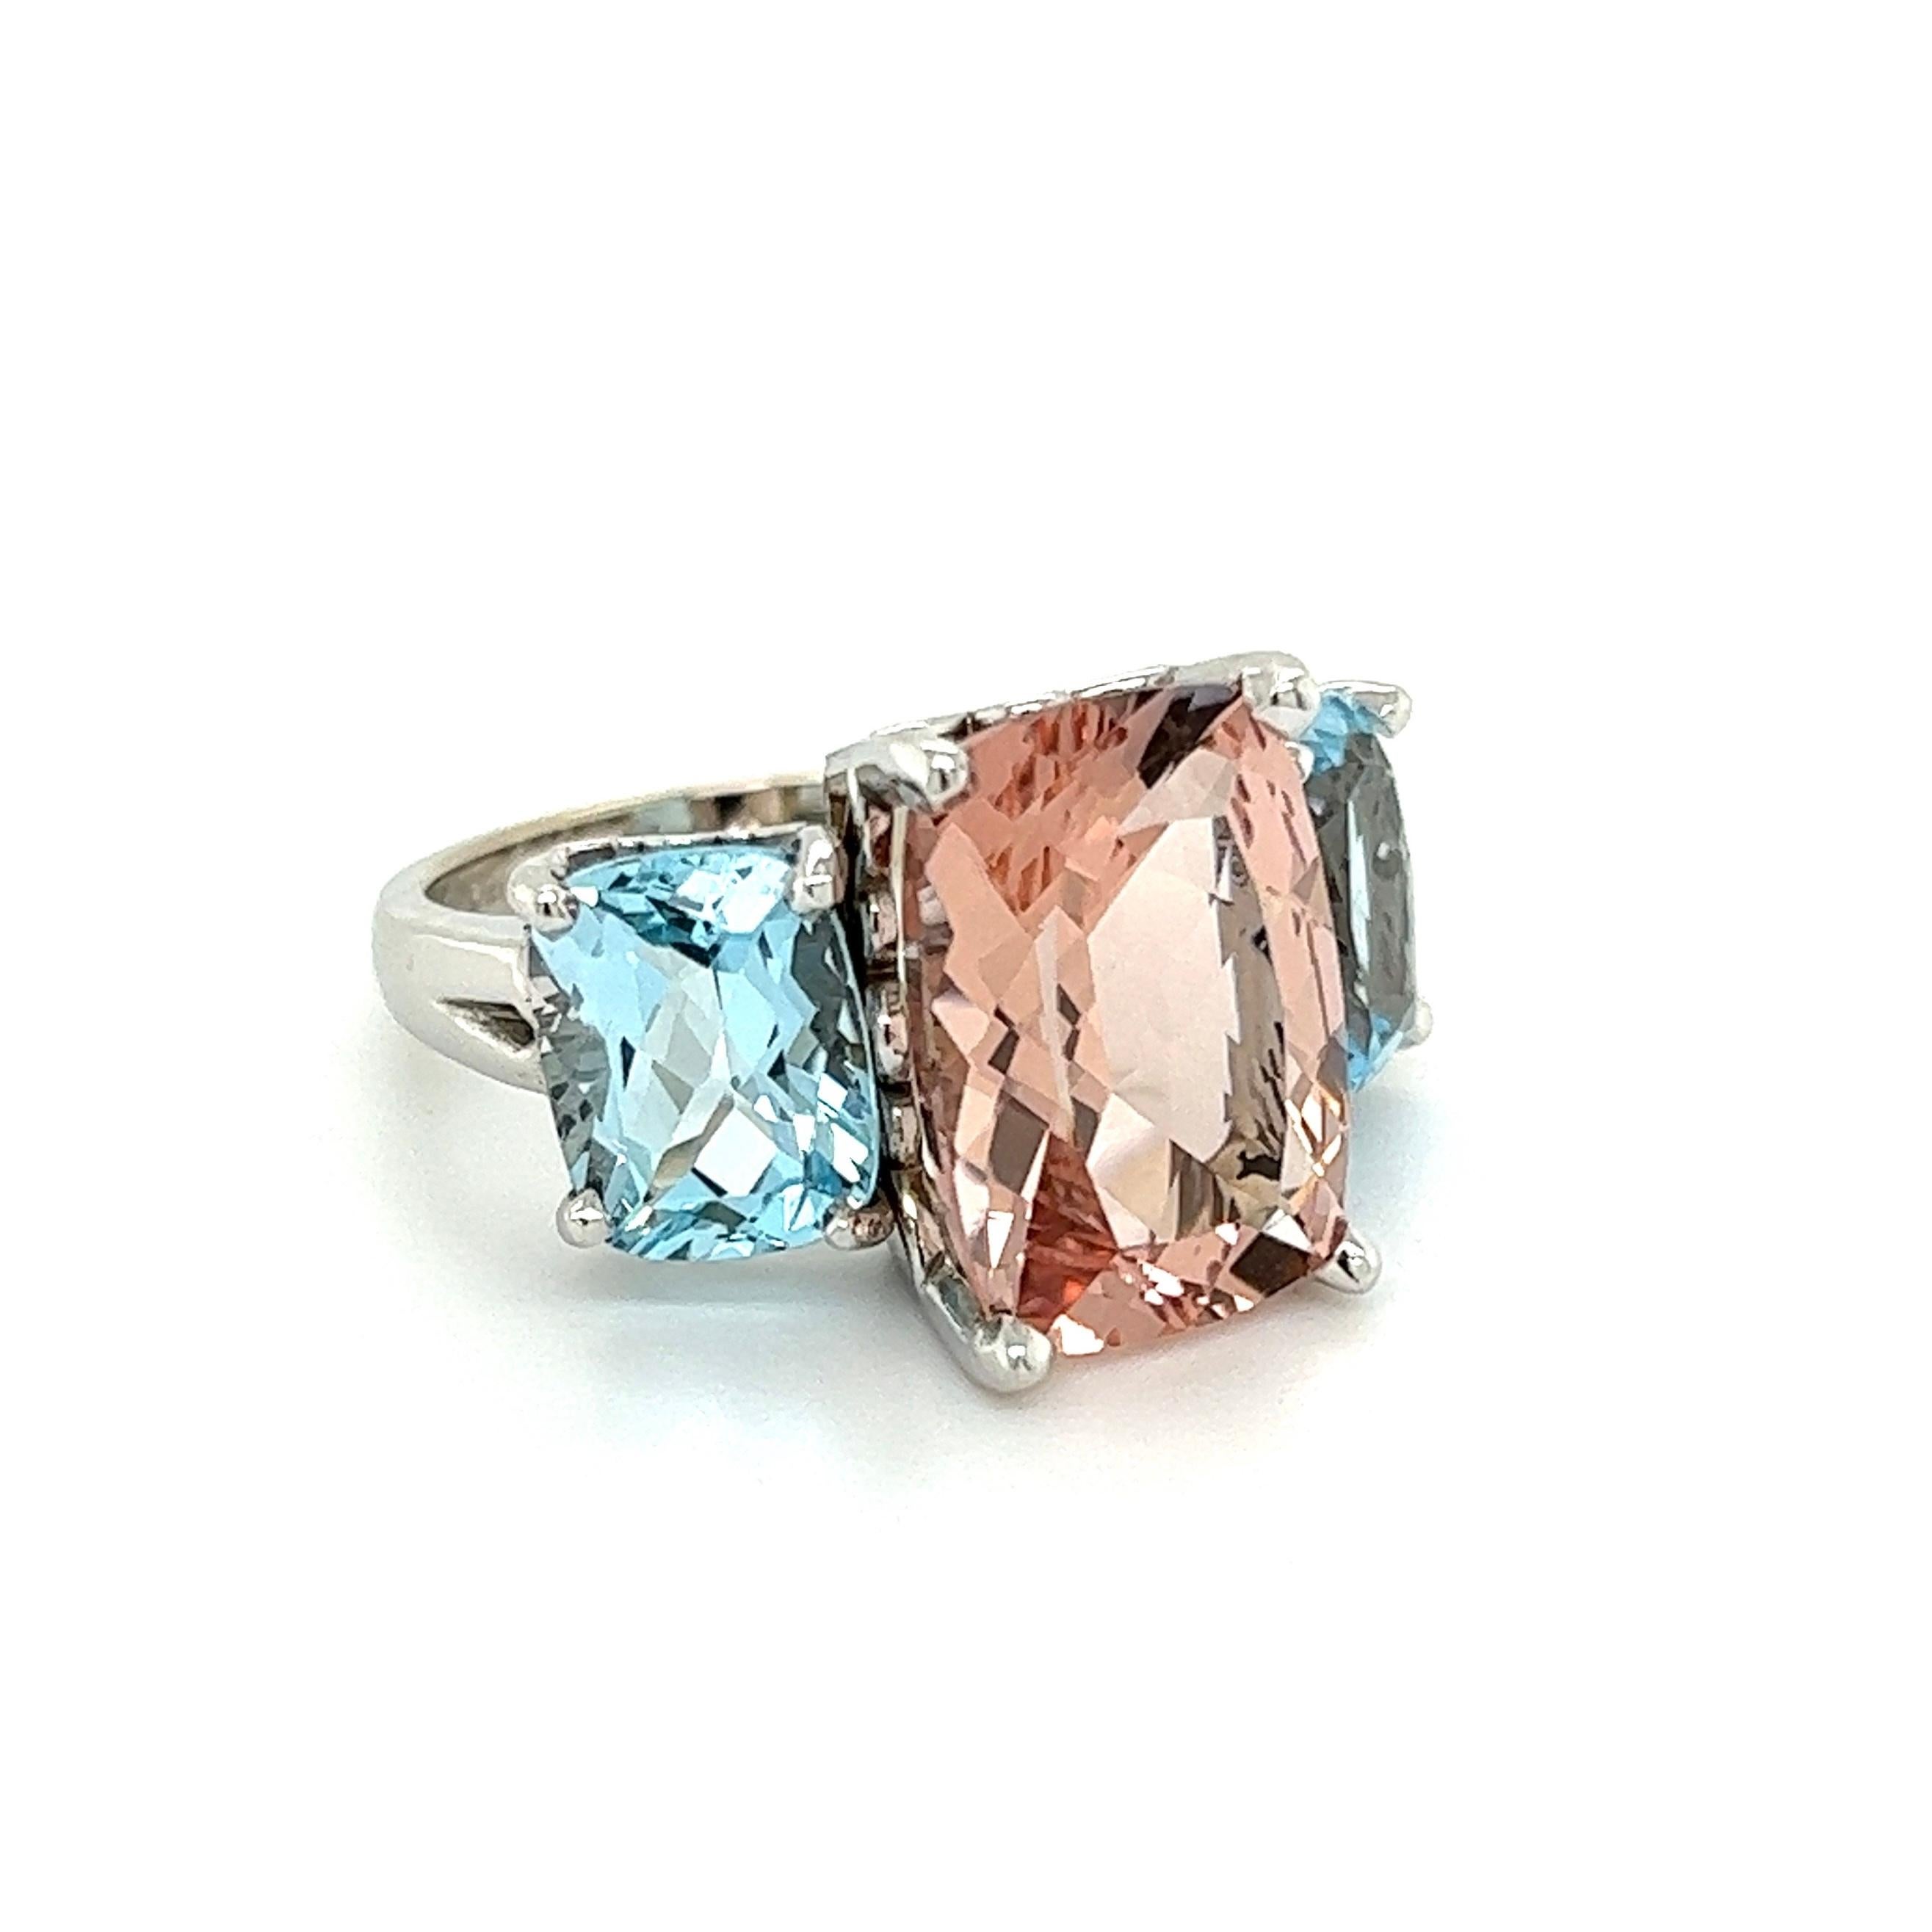 Simply Beautiful! Three Stone Cushion-cut Morganite and 4tcw Cushion Aquamarine Band Ring. Securely Hand set Gemstones measuring approx. 14mm x 10mm Morganite and 9mm x 7mm Aquamarines. Beautifully Hand crafted in 14K White Gold mounting. Dimensions